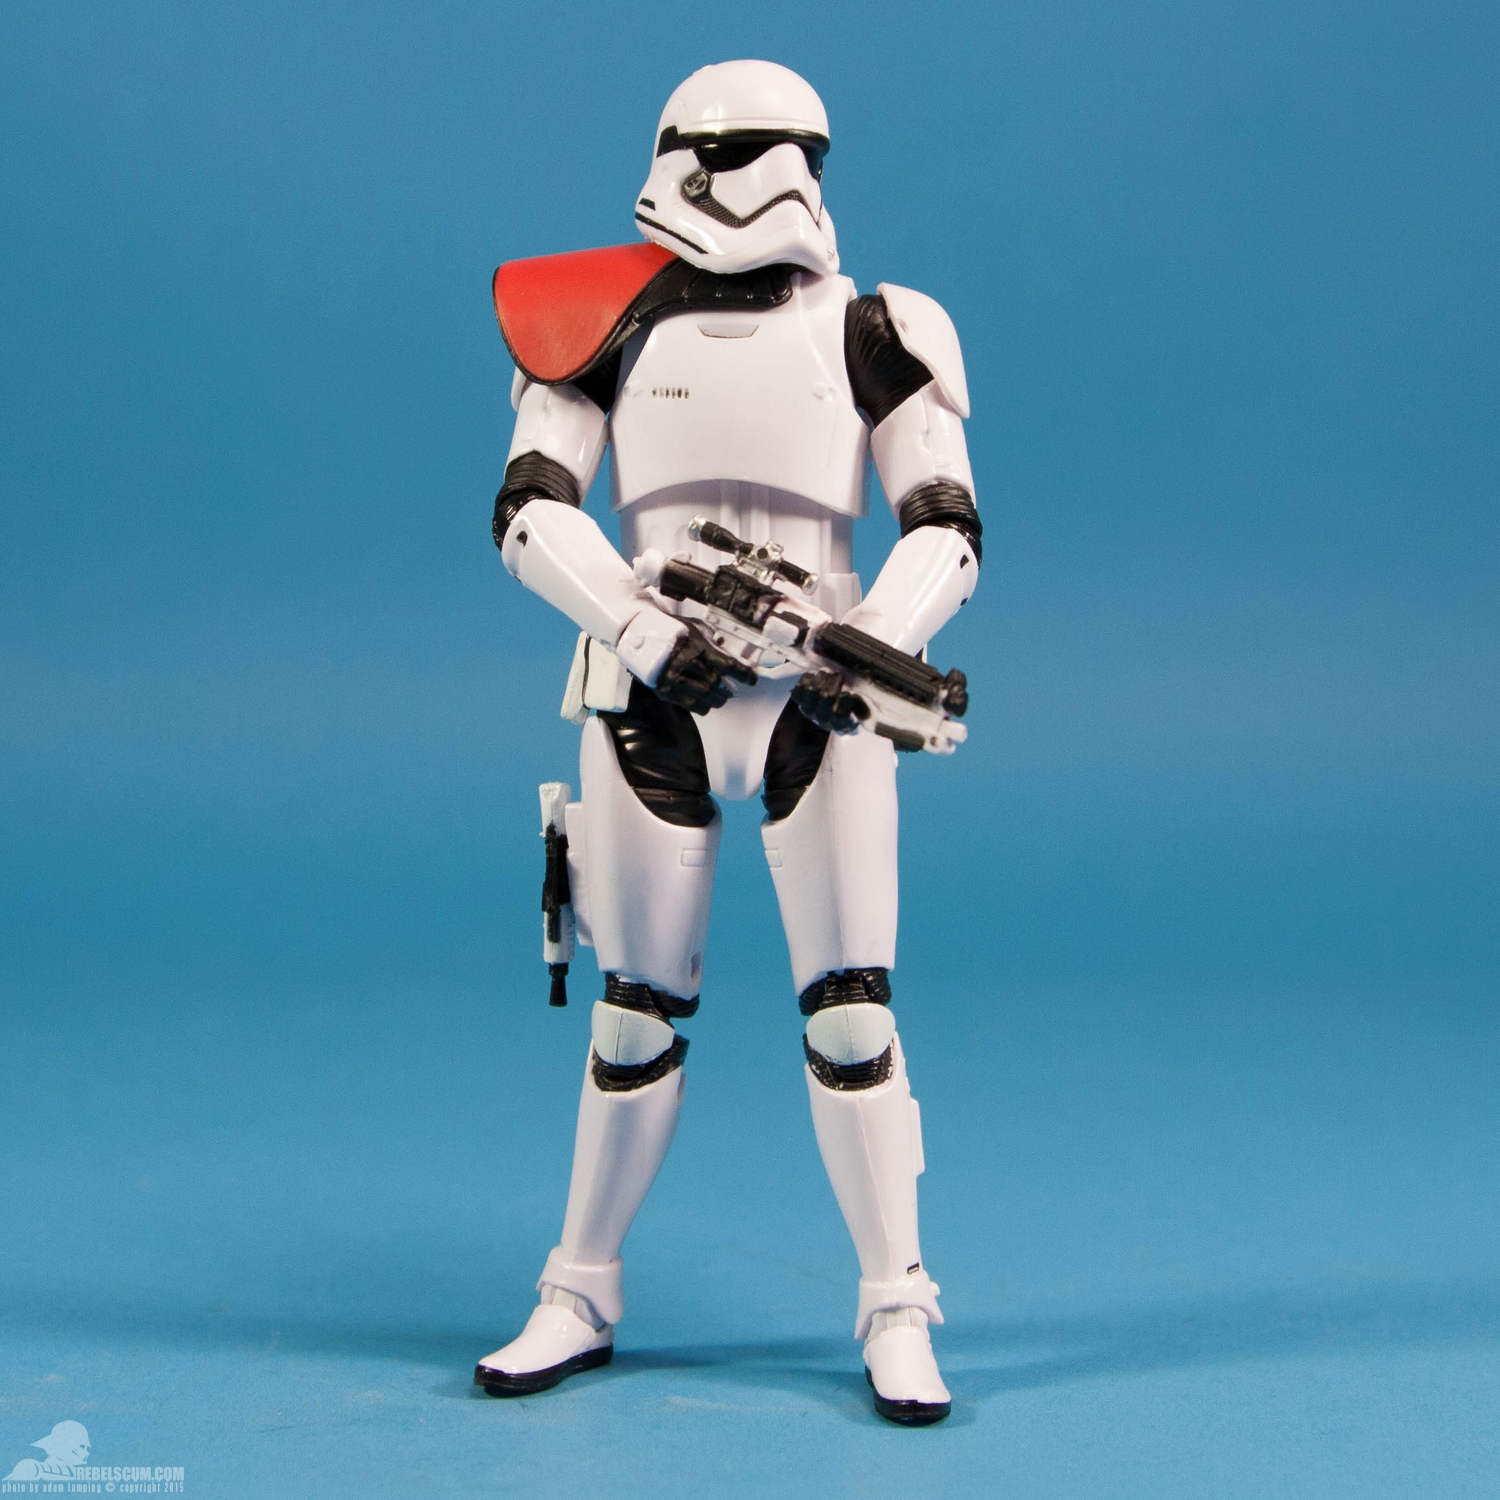 stormtrooper-collection-6-inch-4-pack-amazon-exclusive-045.jpg